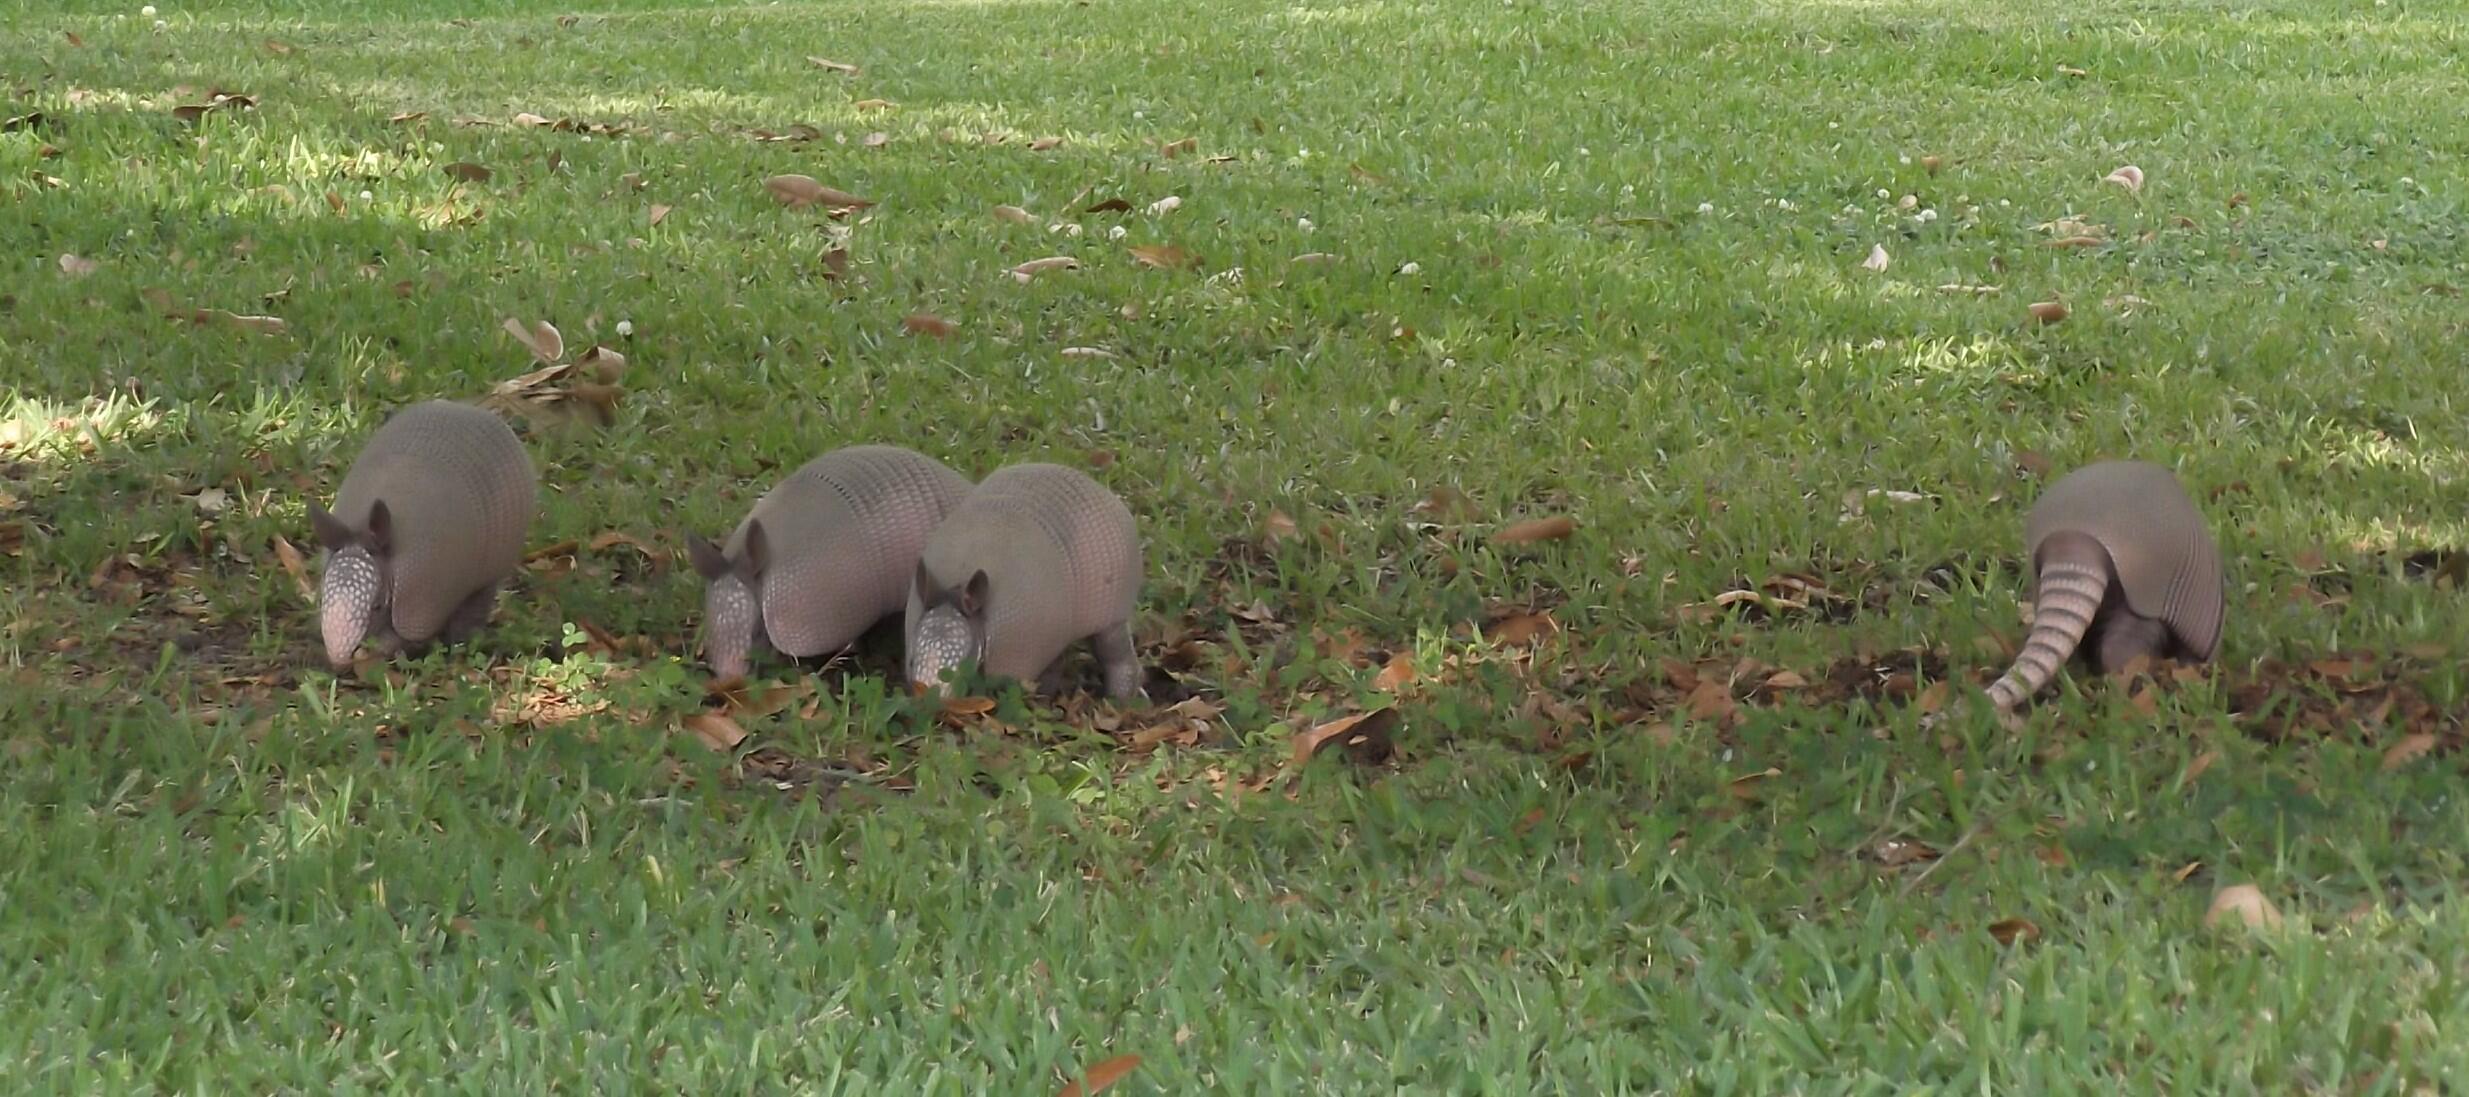 Four armadillos in the grass